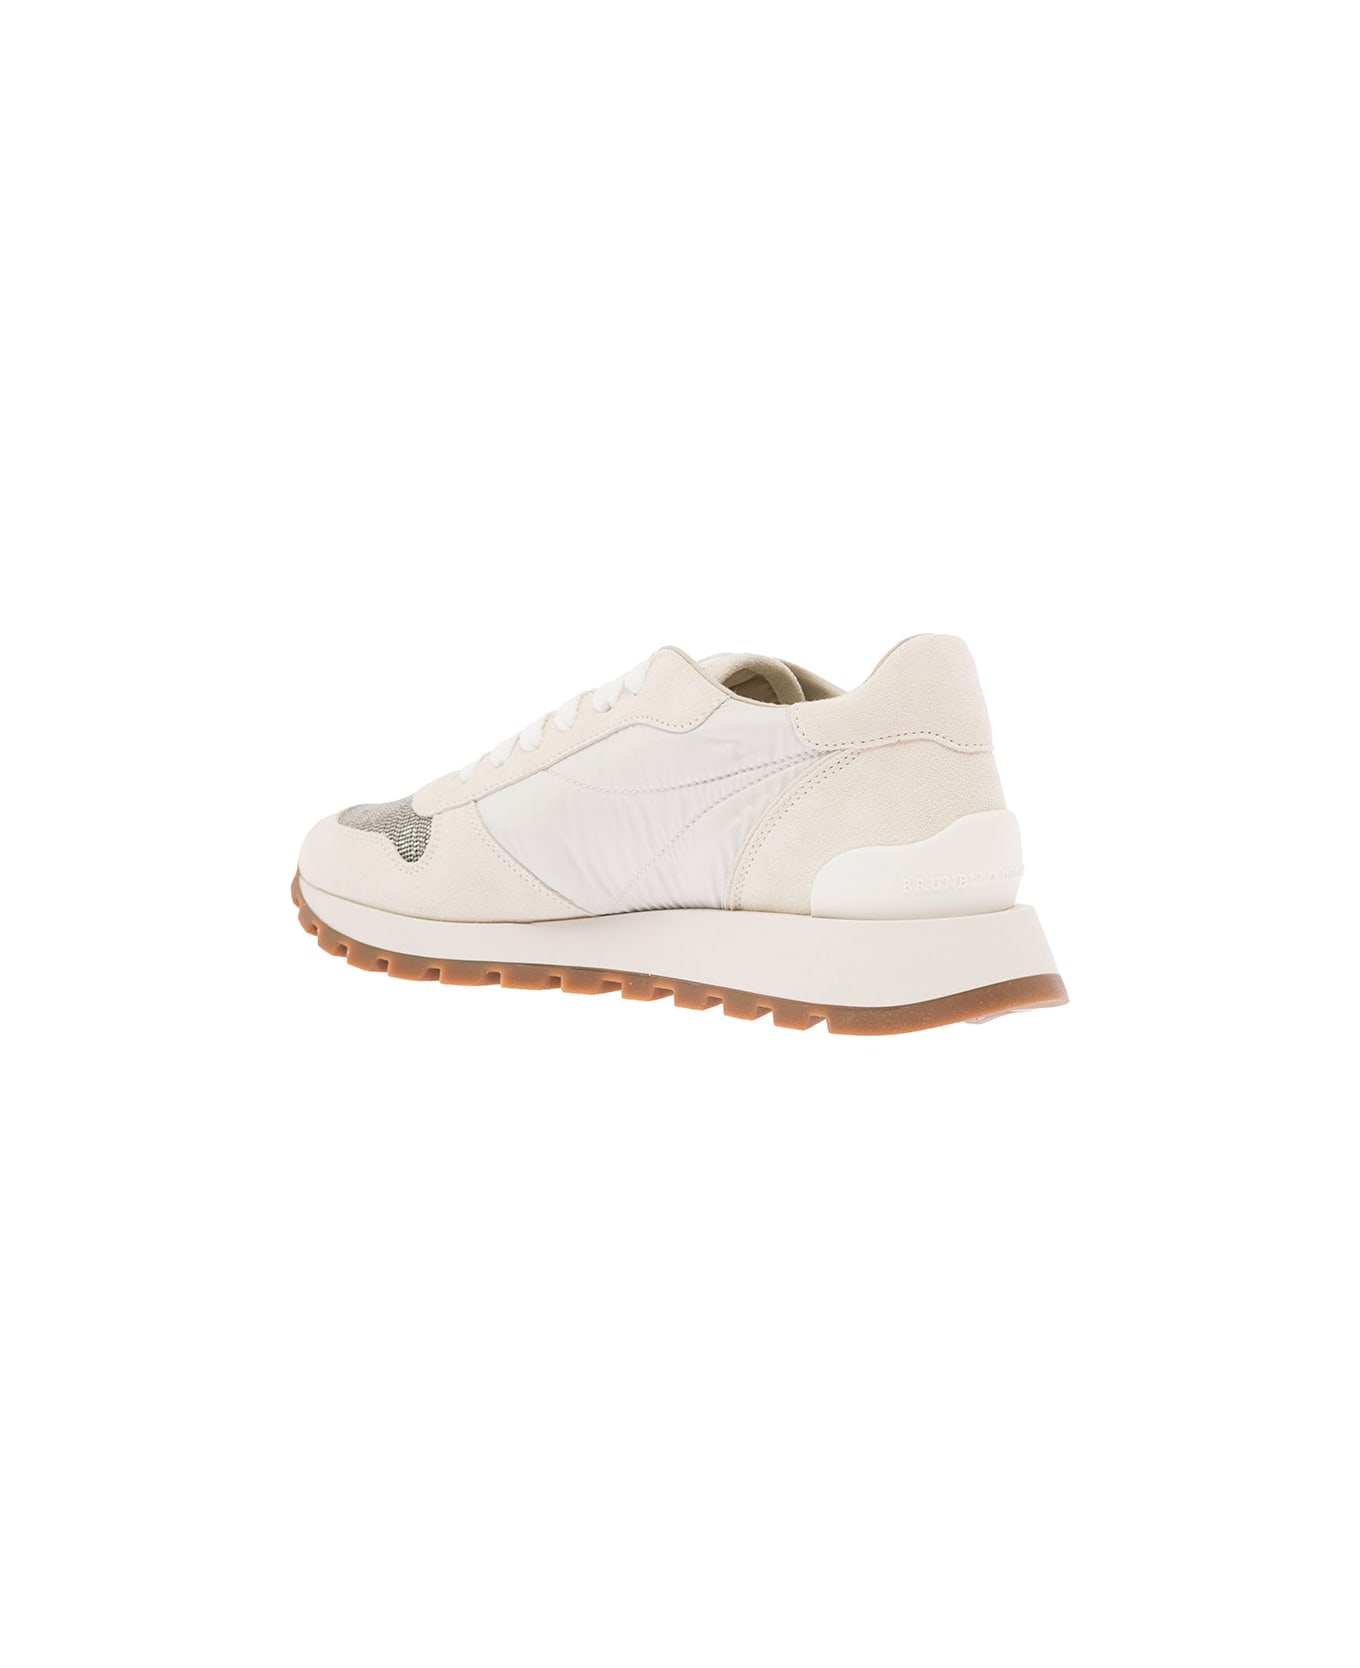 Brunello Cucinelli Woman's Runner White Leather Sneakers With Monile Insert - White